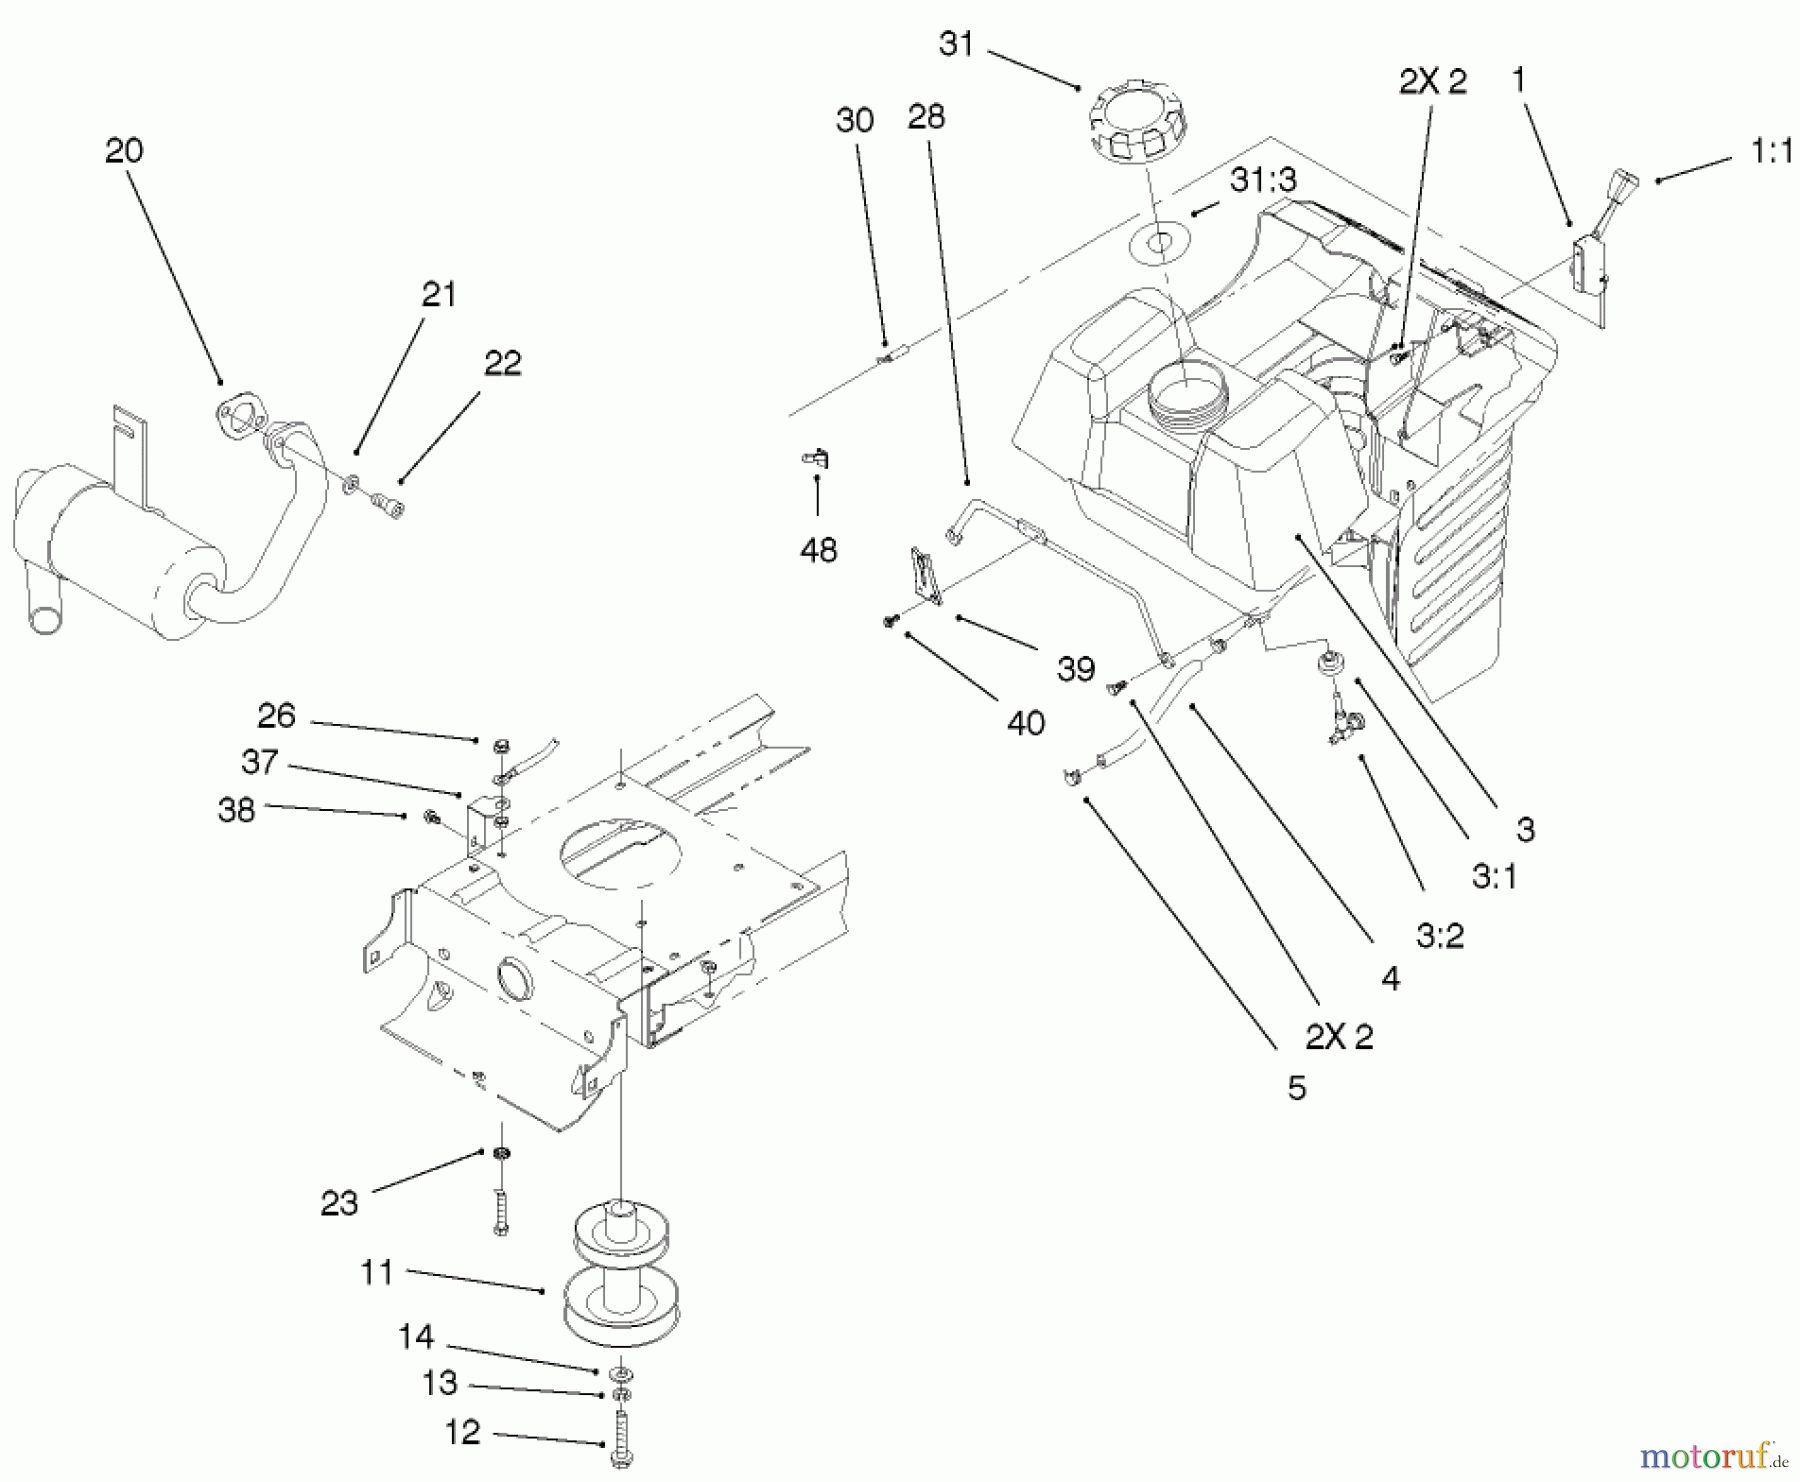  Toro Neu Mowers, Lawn & Garden Tractor Seite 1 71209 (13-32XLE) - Toro 13-32XLE Lawn Tractor, 2001 (210000001-210999999) ENGINE SYSTEMS COMPONENTS ASSEMBLY